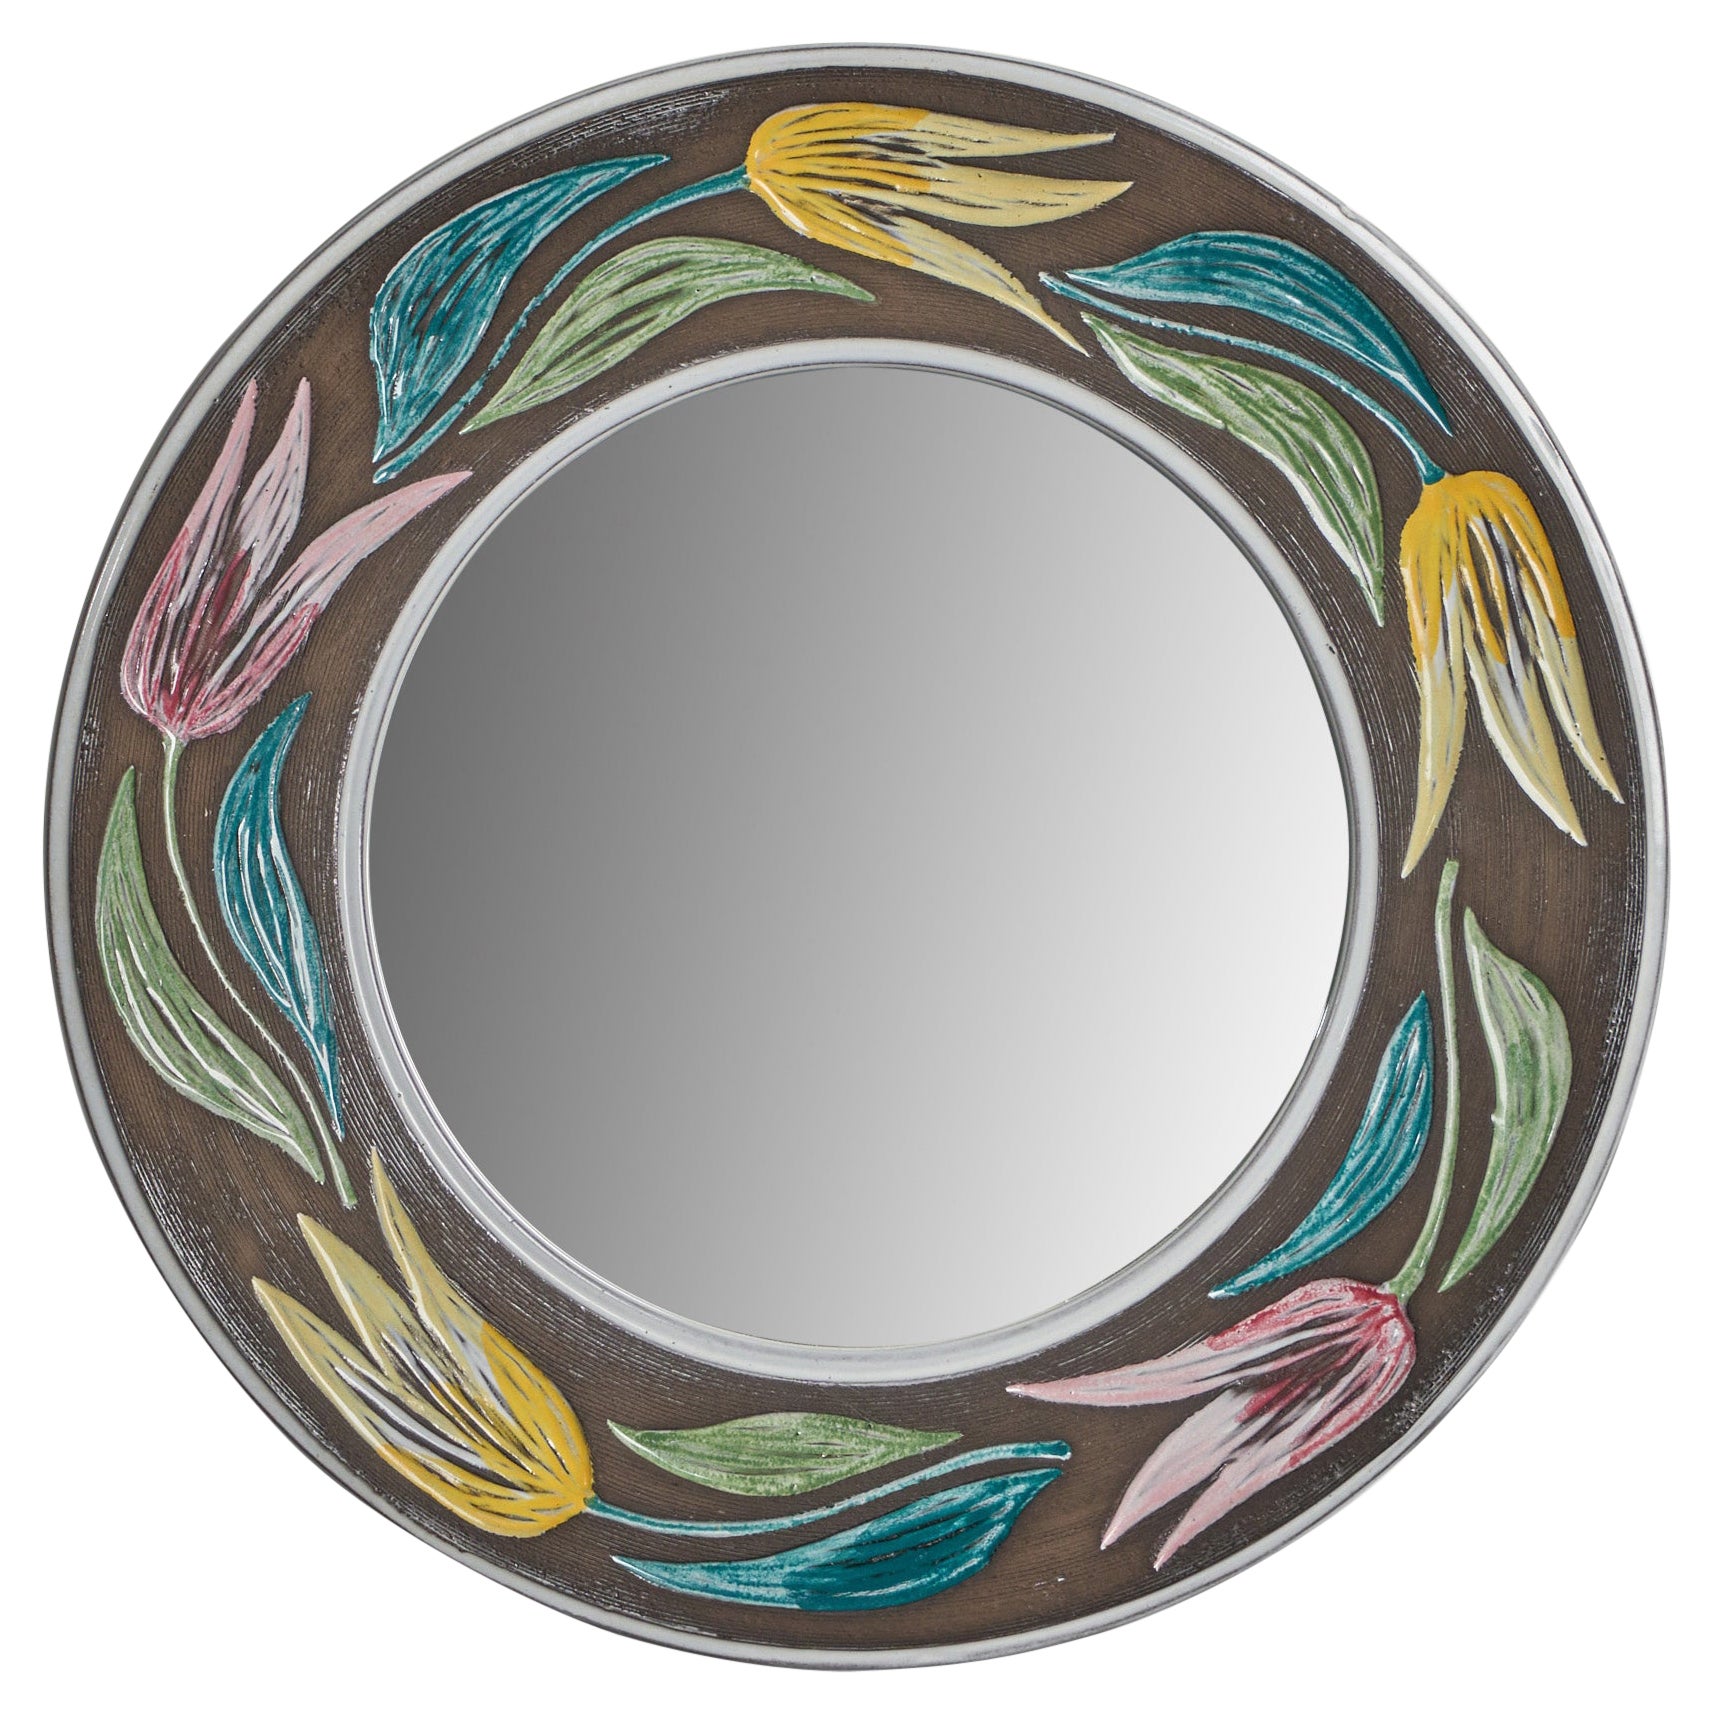 Mari Simmulson, Wall Mirror, Painted Ceramic, Sweden, 1960s For Sale